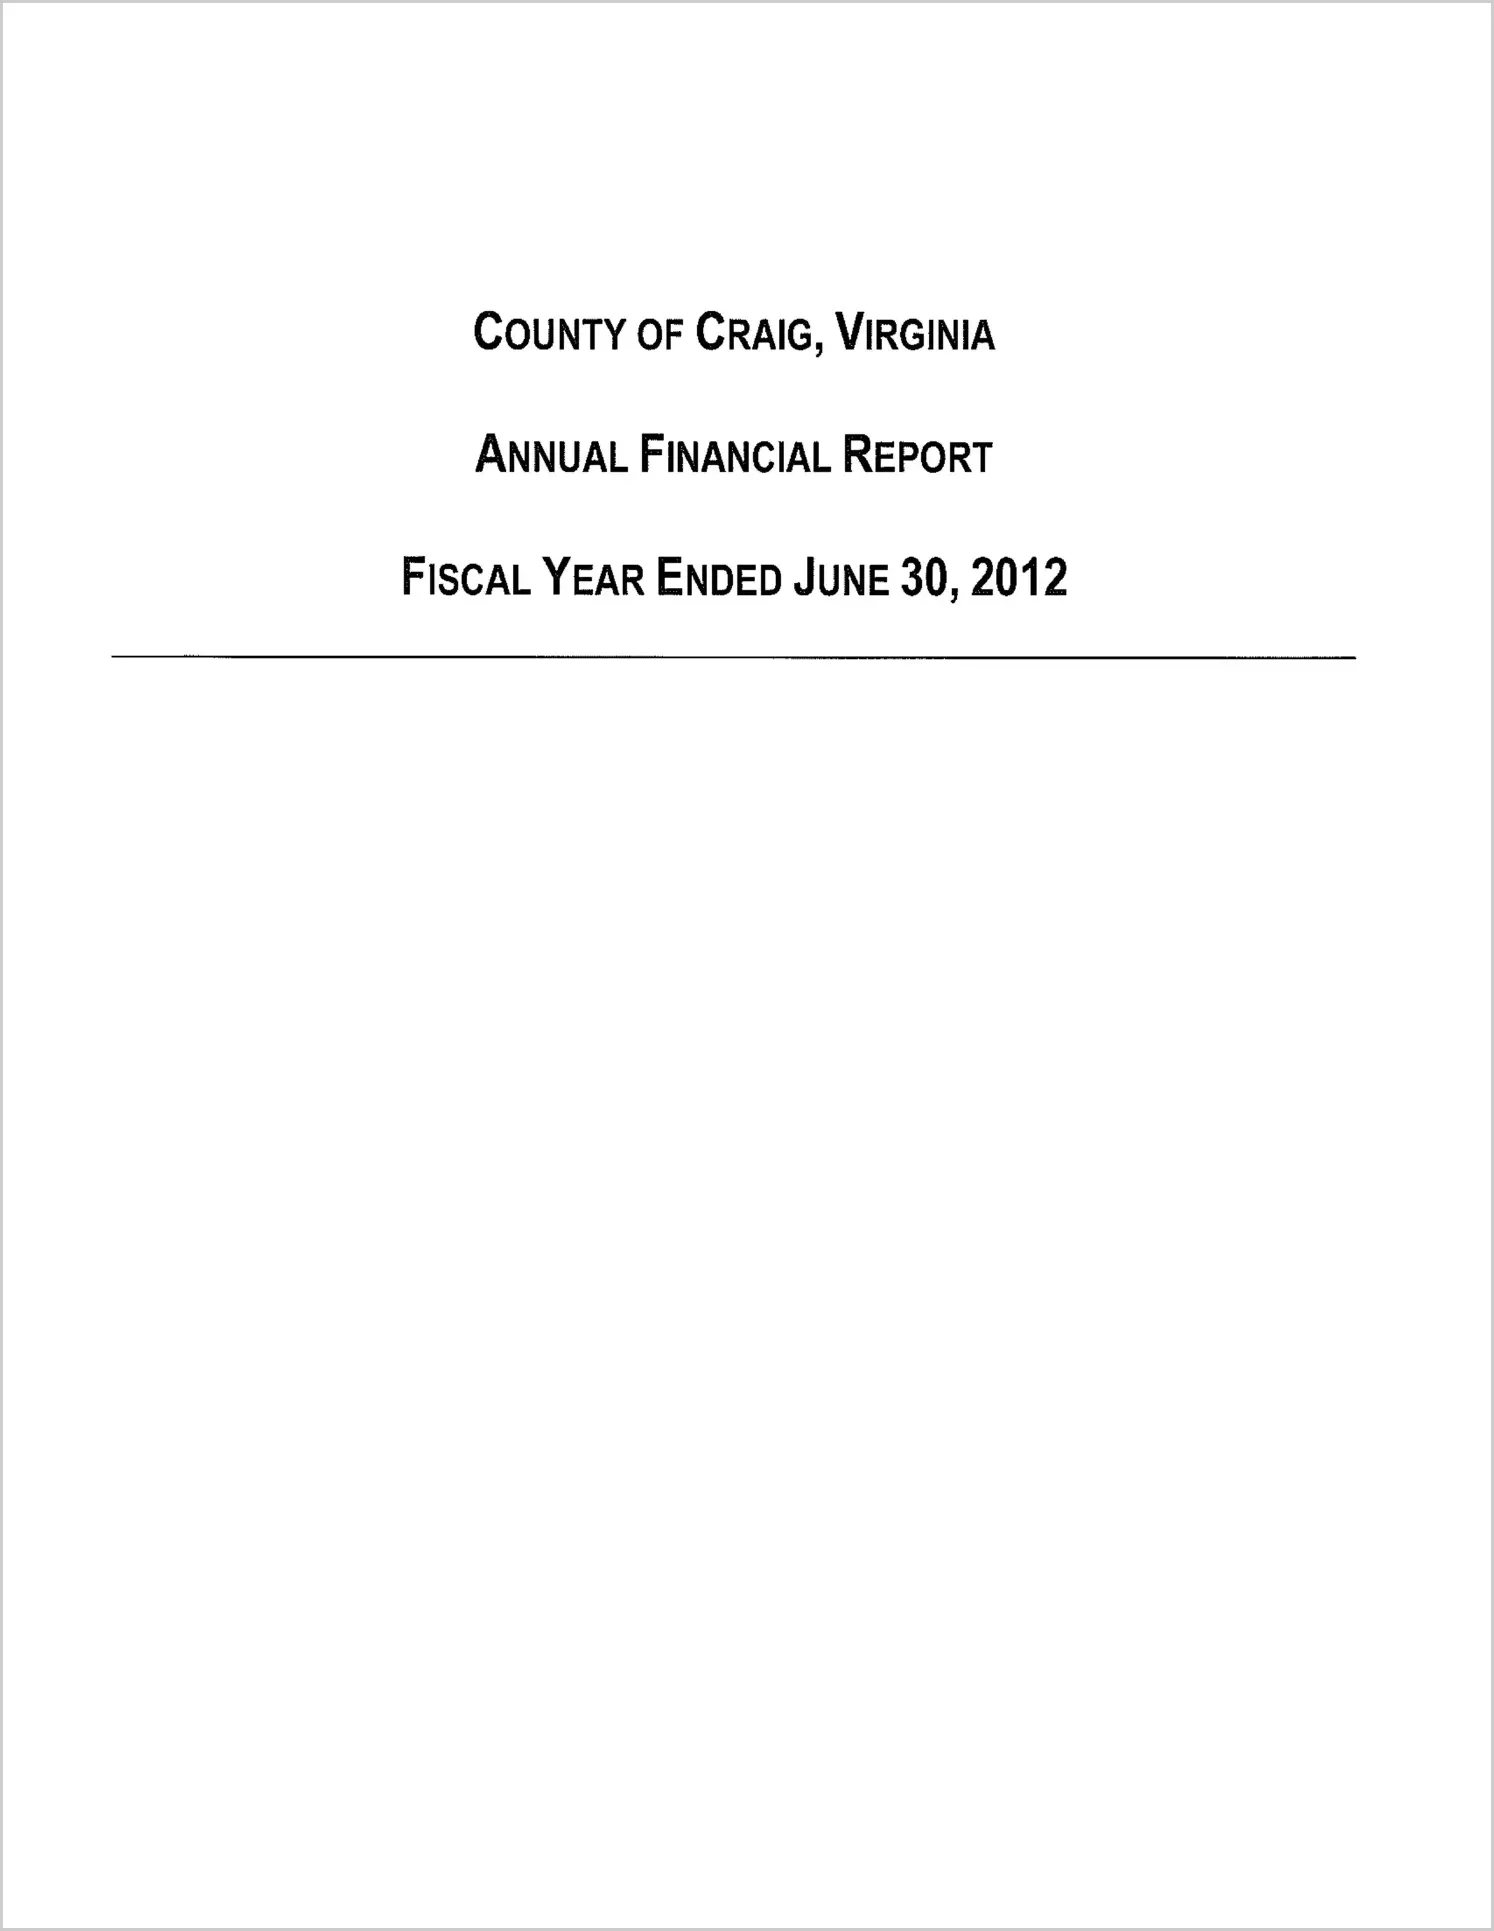 2012 Annual Financial Report for County of Craig